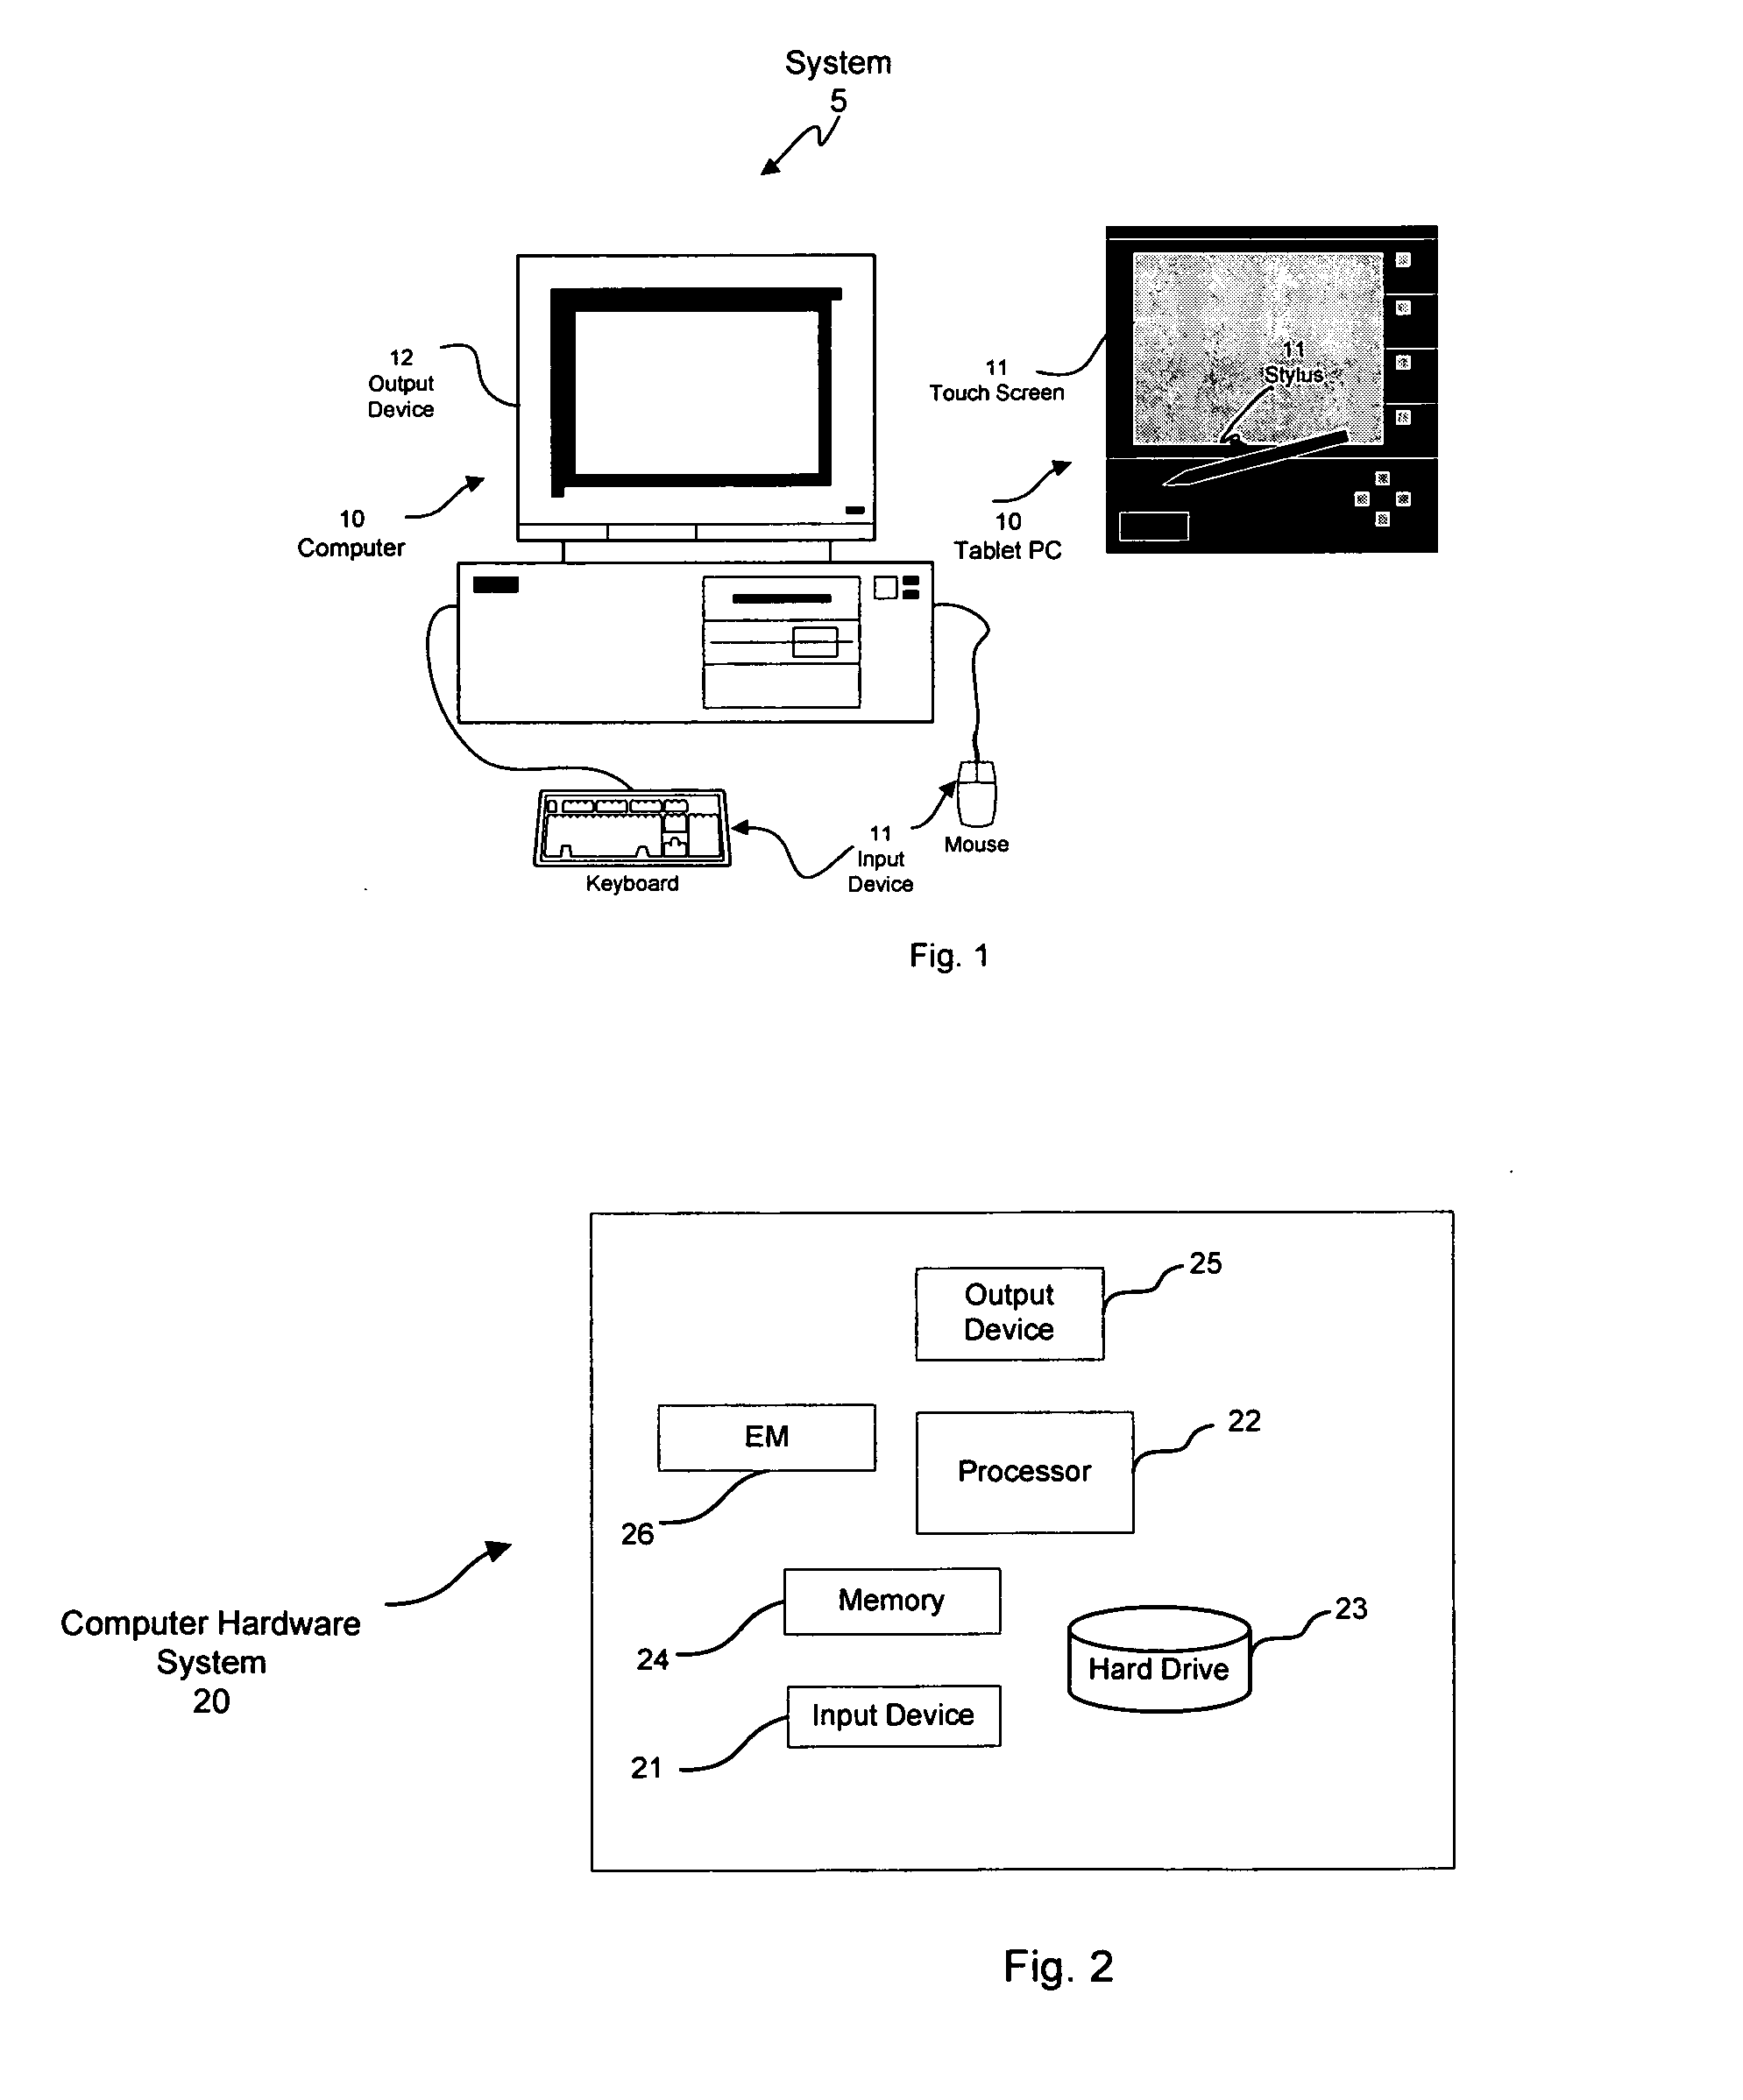 Method and apparatus for seismic data interpretation using 3D overall view